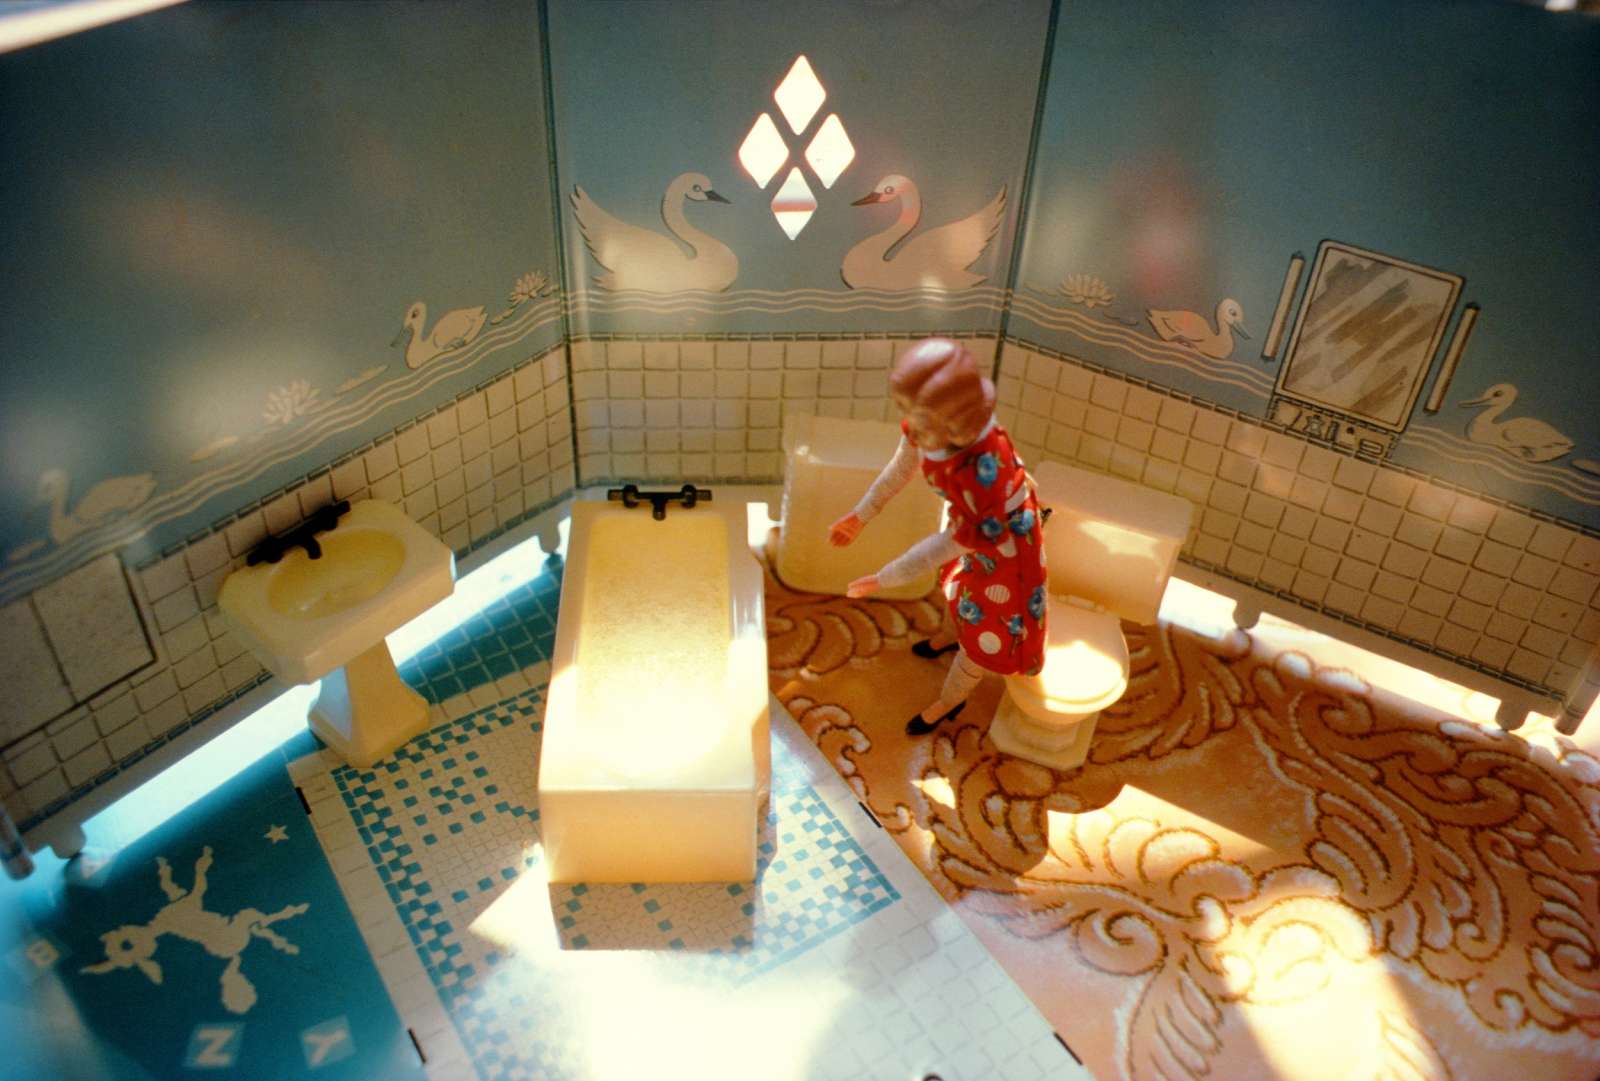 Laurie Simmons, New Bathroom/Aerial View/Sunlight, 1979